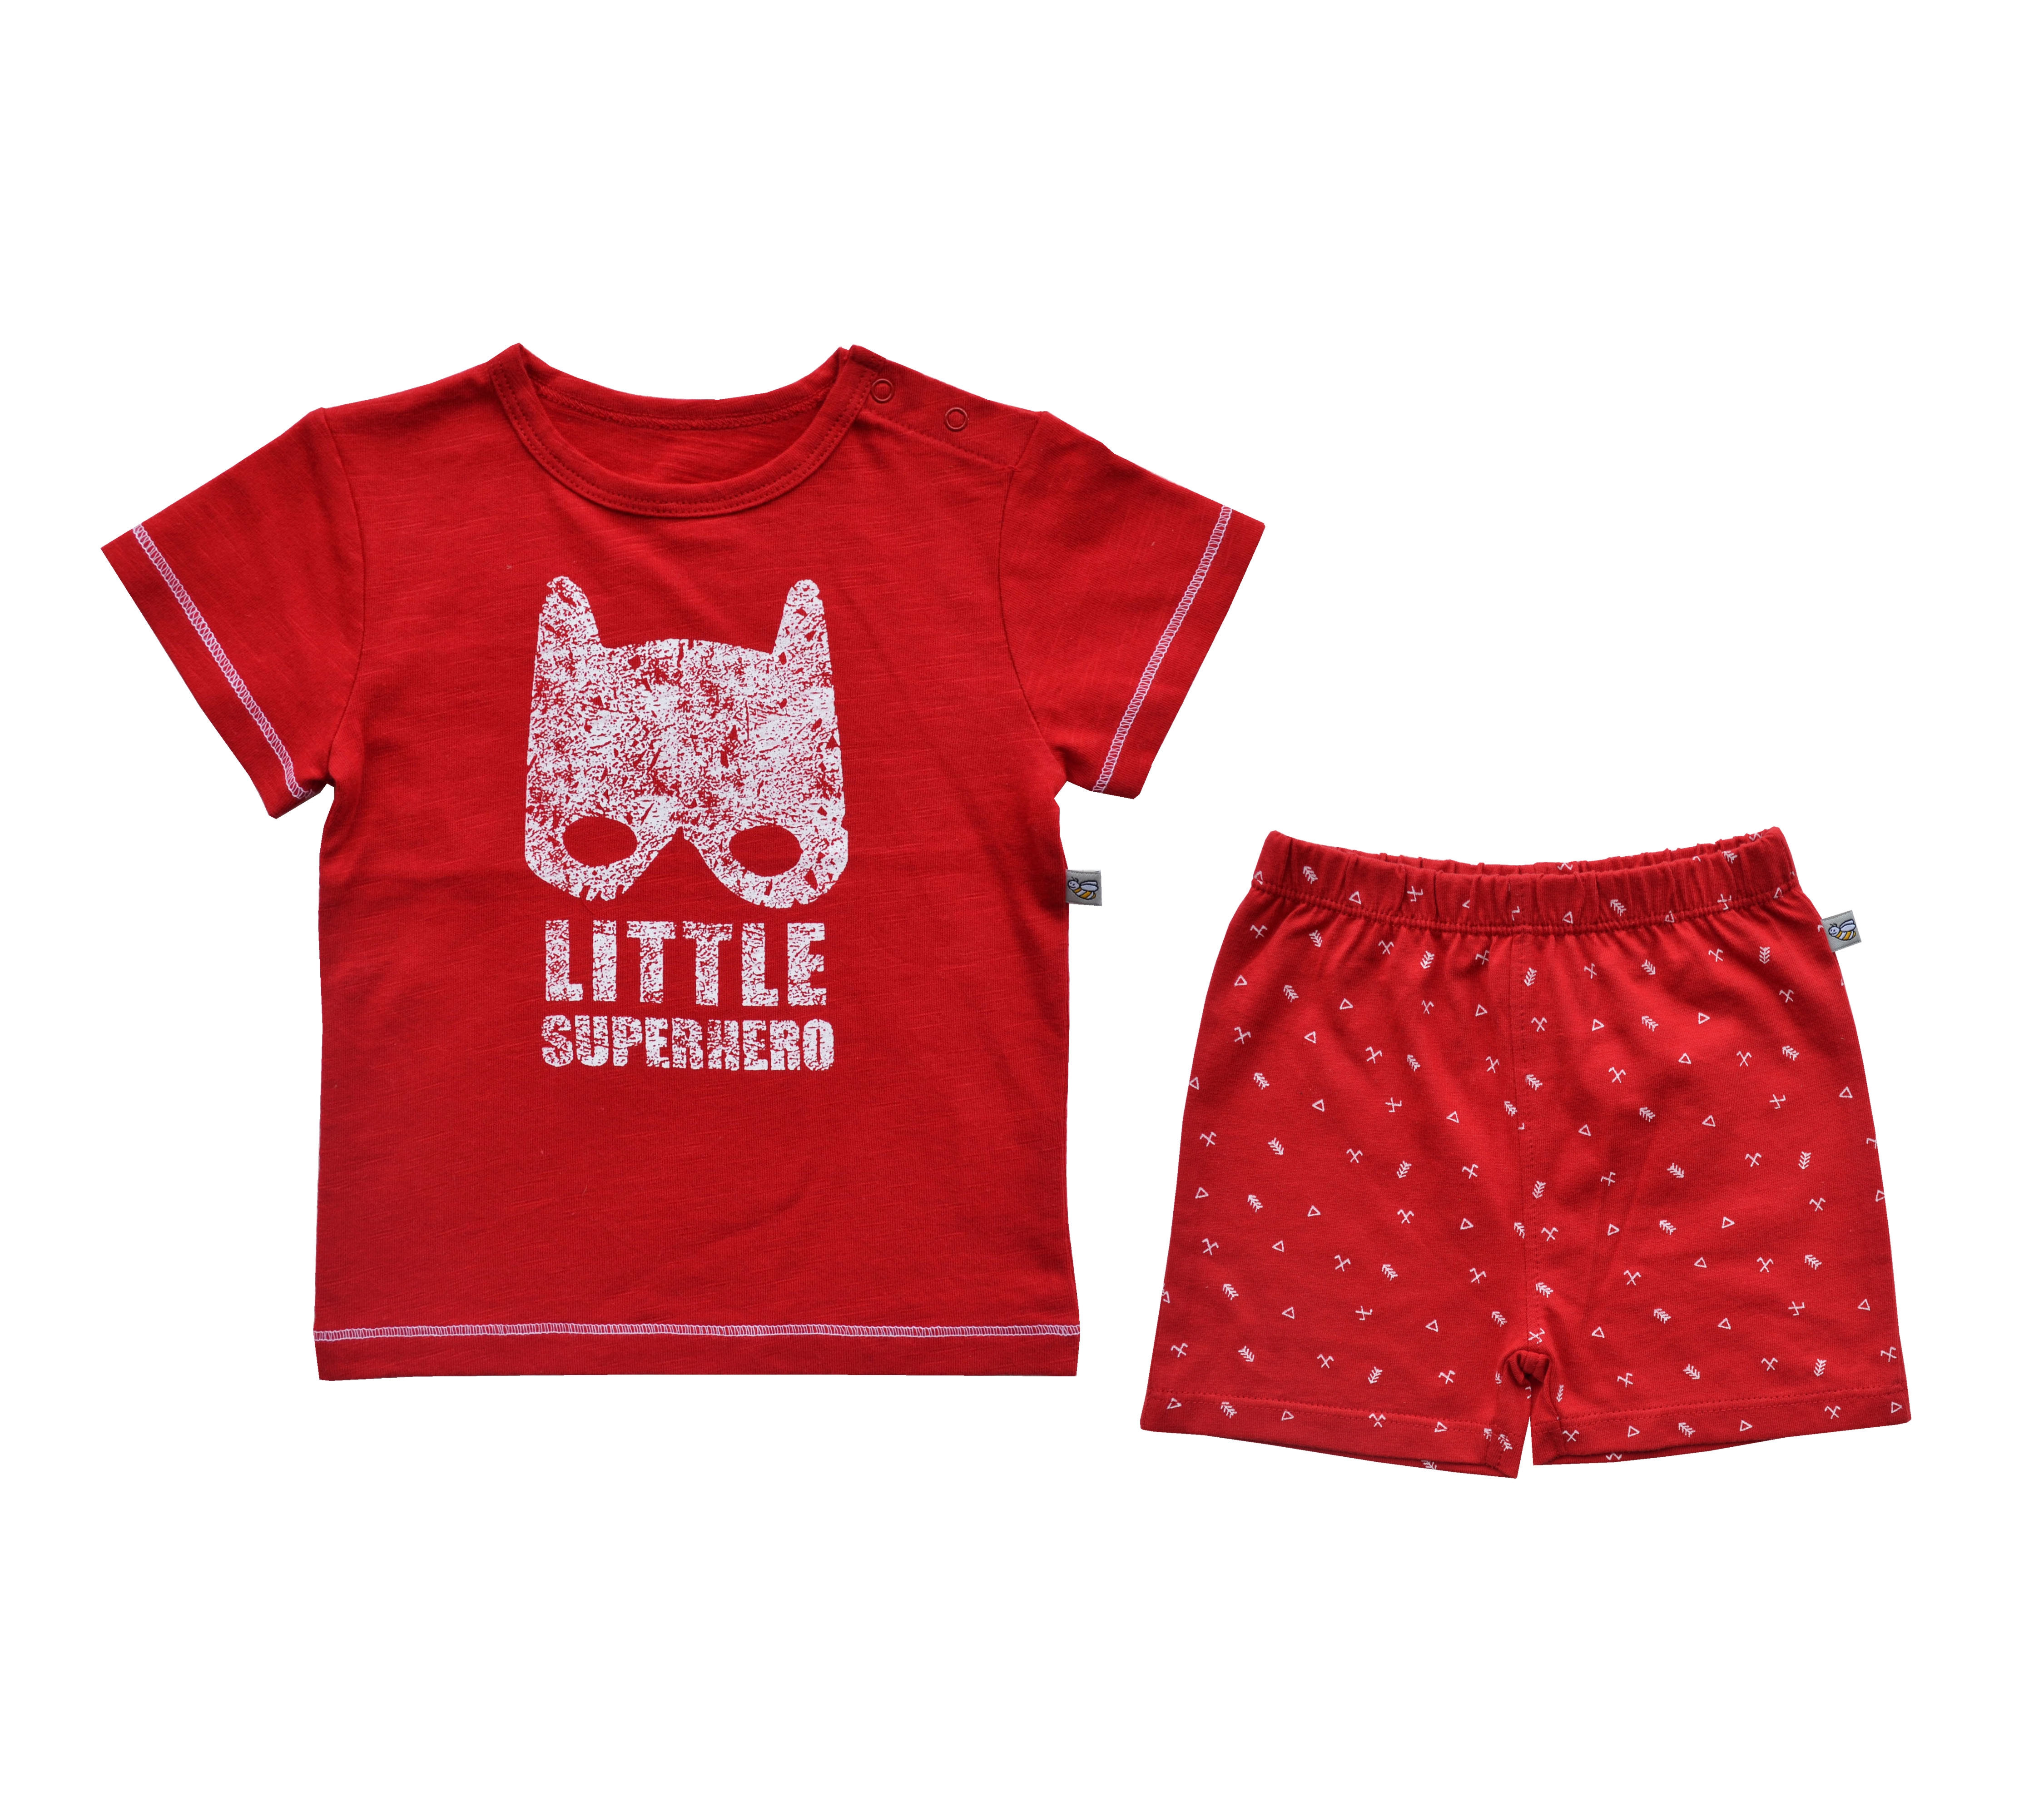 Babeez | Little Superhero Print Red T-Shirt + Red Allover Printed Shorty Set (100% Cotton Single Jersey) undefined